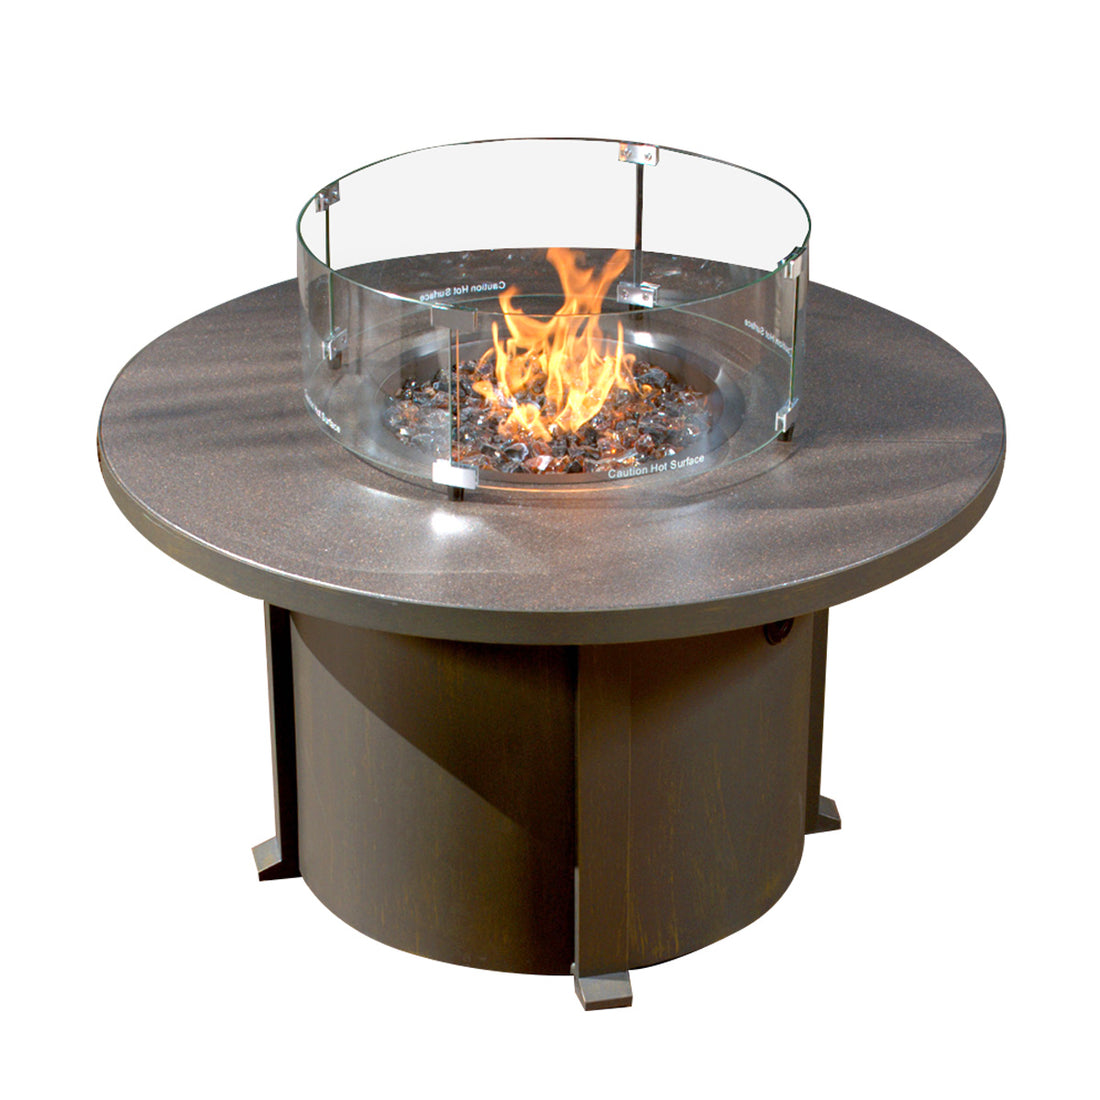 42″ Cal Sil Fire Pit Round